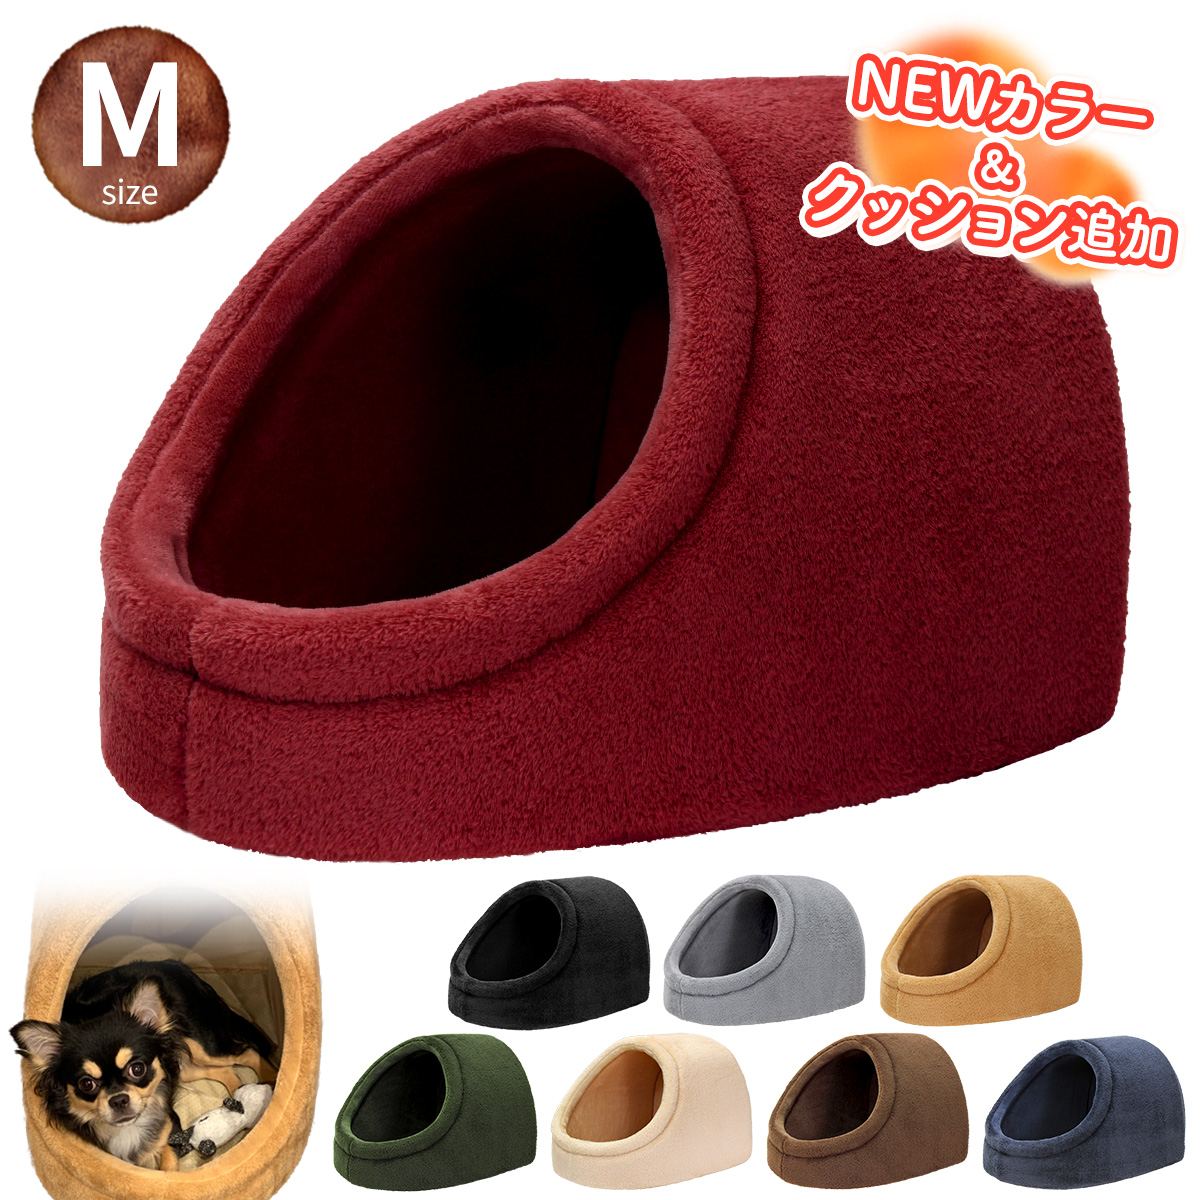  dome type pet bed dog cat bed winter stylish house warm pet soft boa dog for bed cat bed dome bed M size 